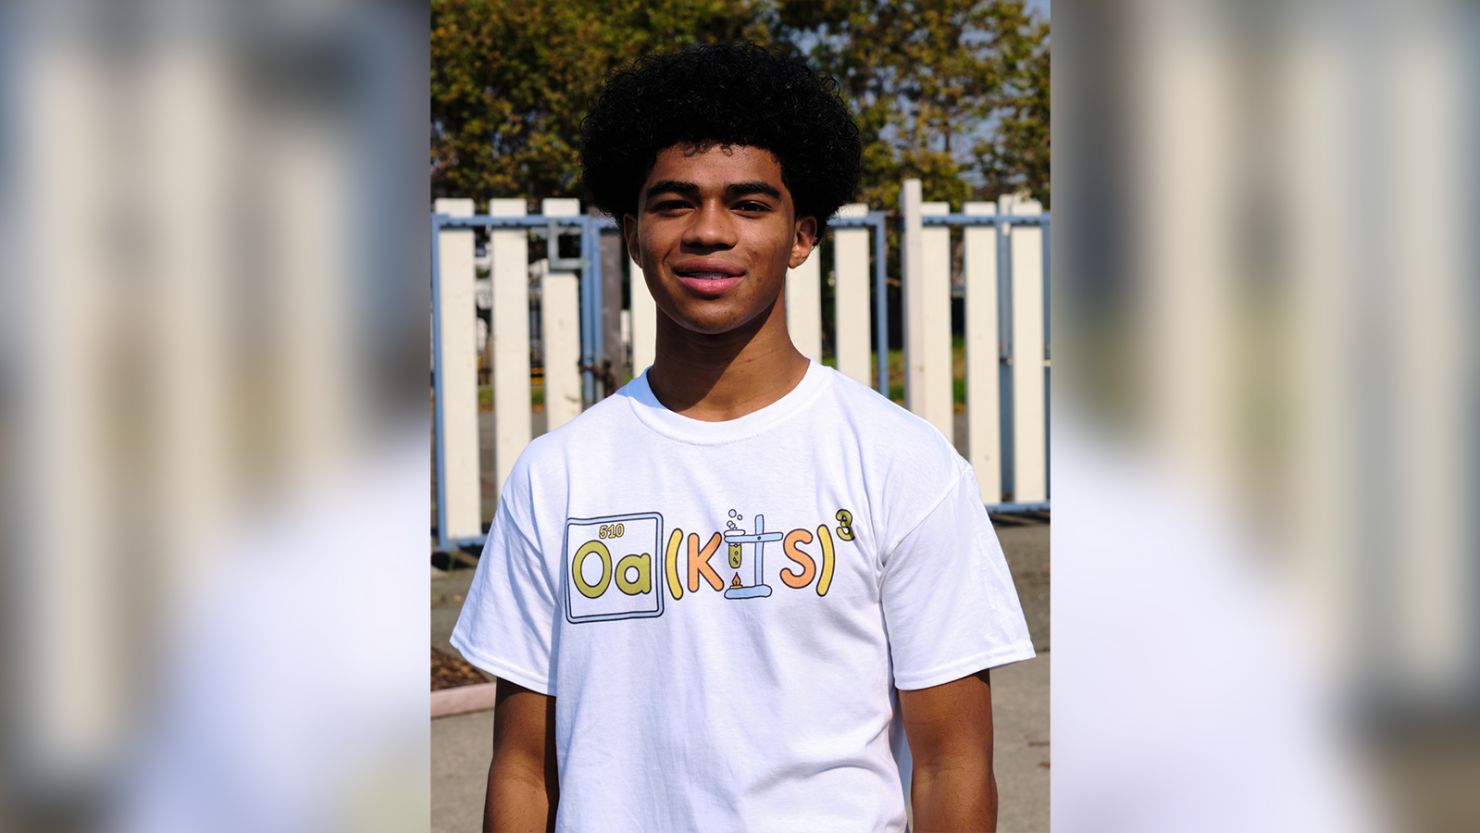 Ahmed Muhammad, senior at Oakland Technical High School, created a nonprofit to help kids learn about science